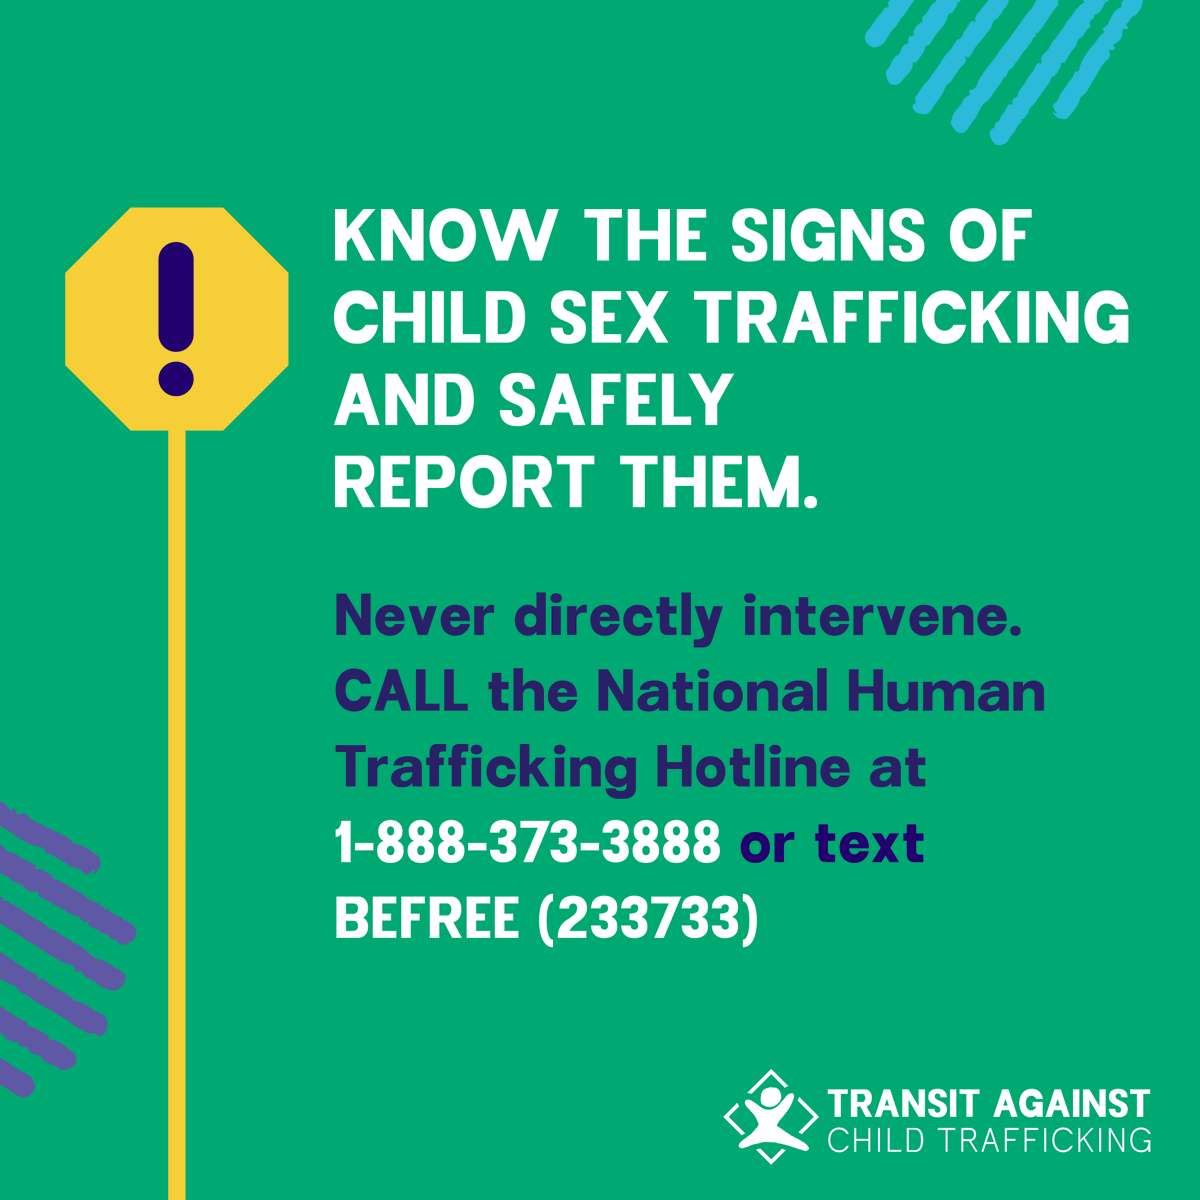 FACT: Child traffickers utilize buses, trains and other forms of public transit to transport their victims. Together, we can stop trafficking if we #KnowTheSigns. Learn more: bit.ly/4aMNPyn